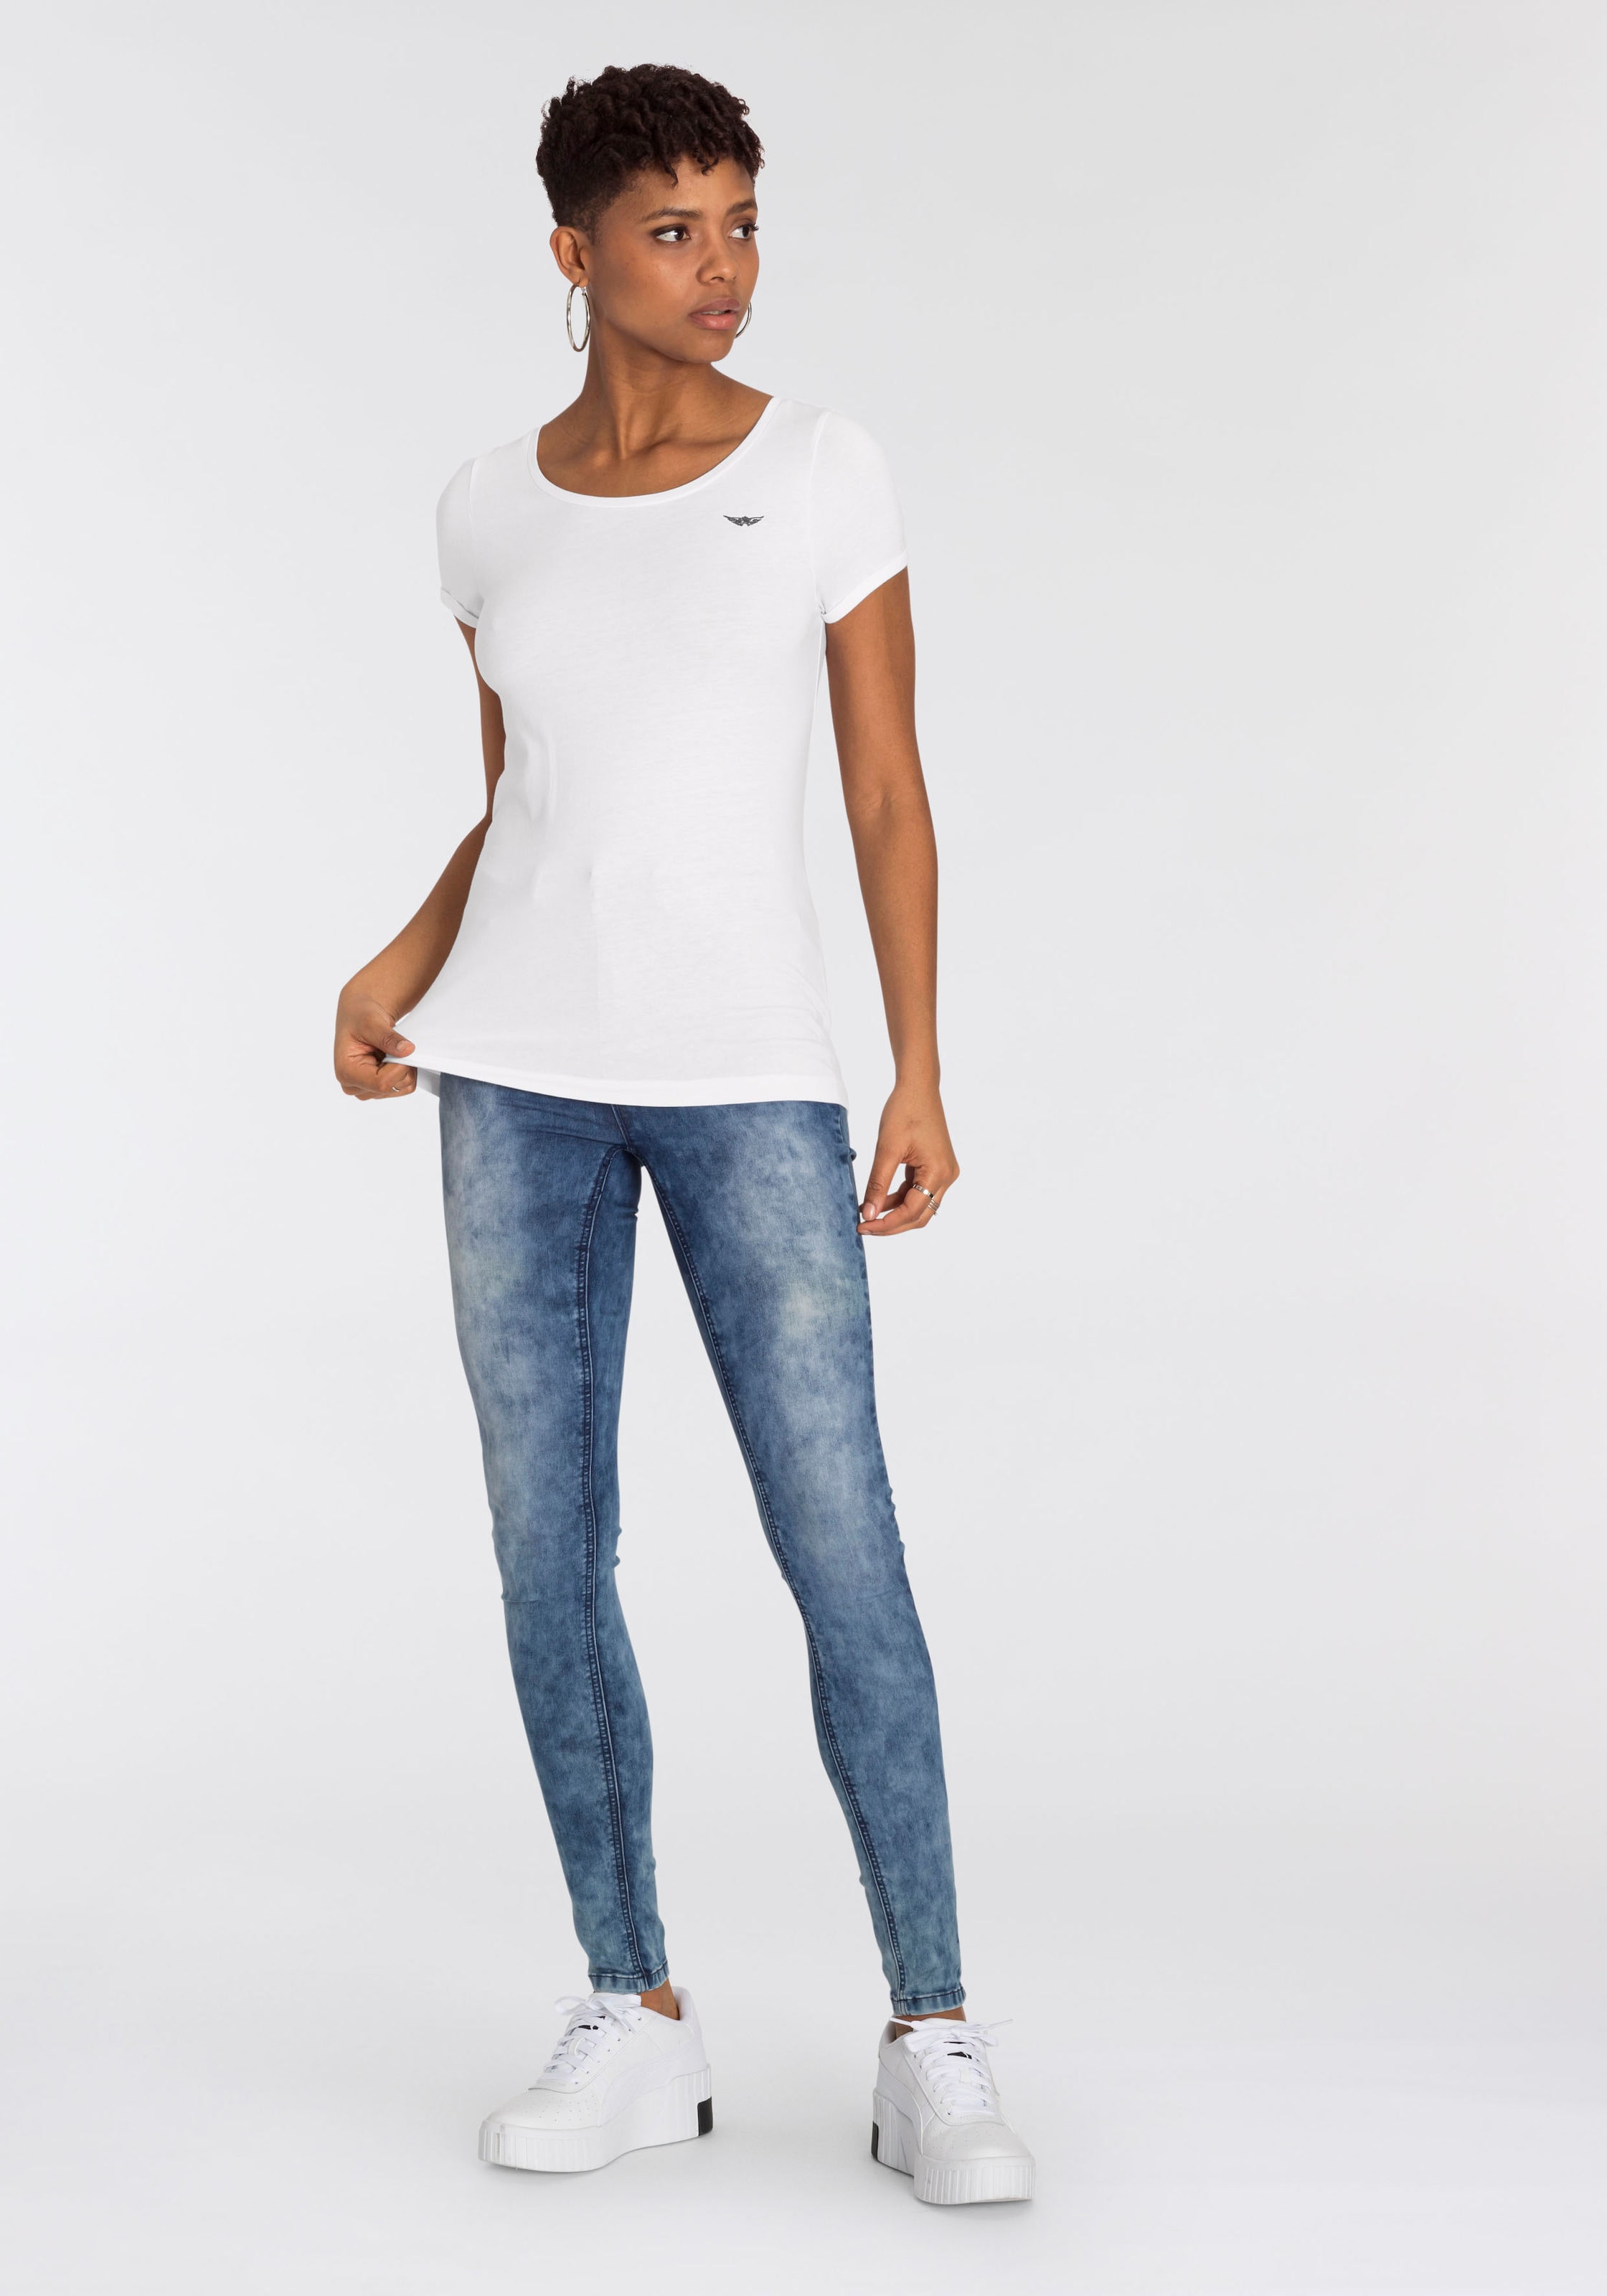 washed«, shoppen moon »Ultra Jeans Stretch I\'m Skinny-fit-Jeans Moonwashed | walking Arizona